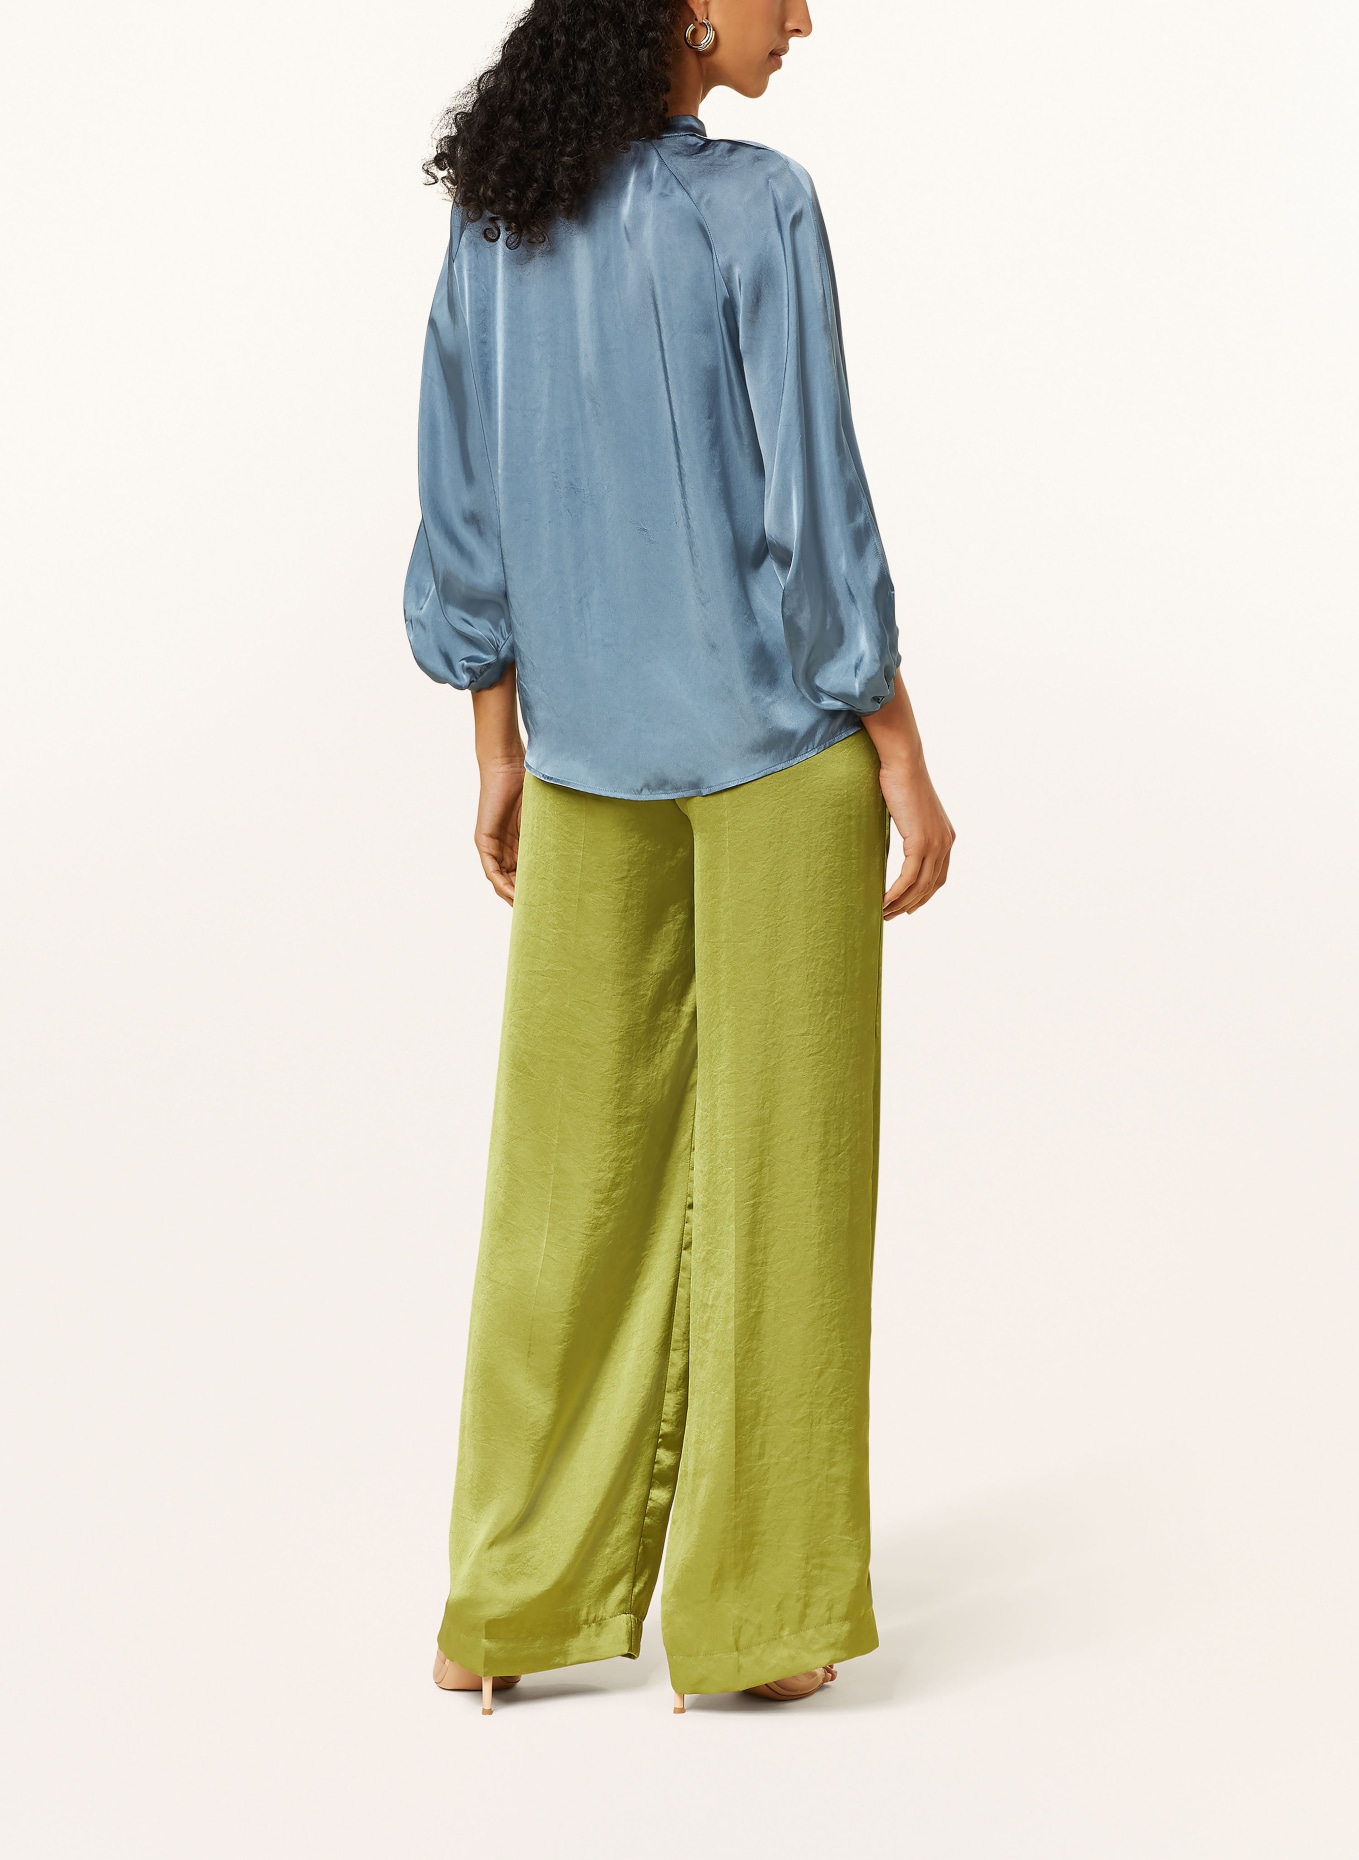 LUISA CERANO Shirt blouse made of satin with 3/4 sleeves, Color: BLUE GRAY (Image 3)